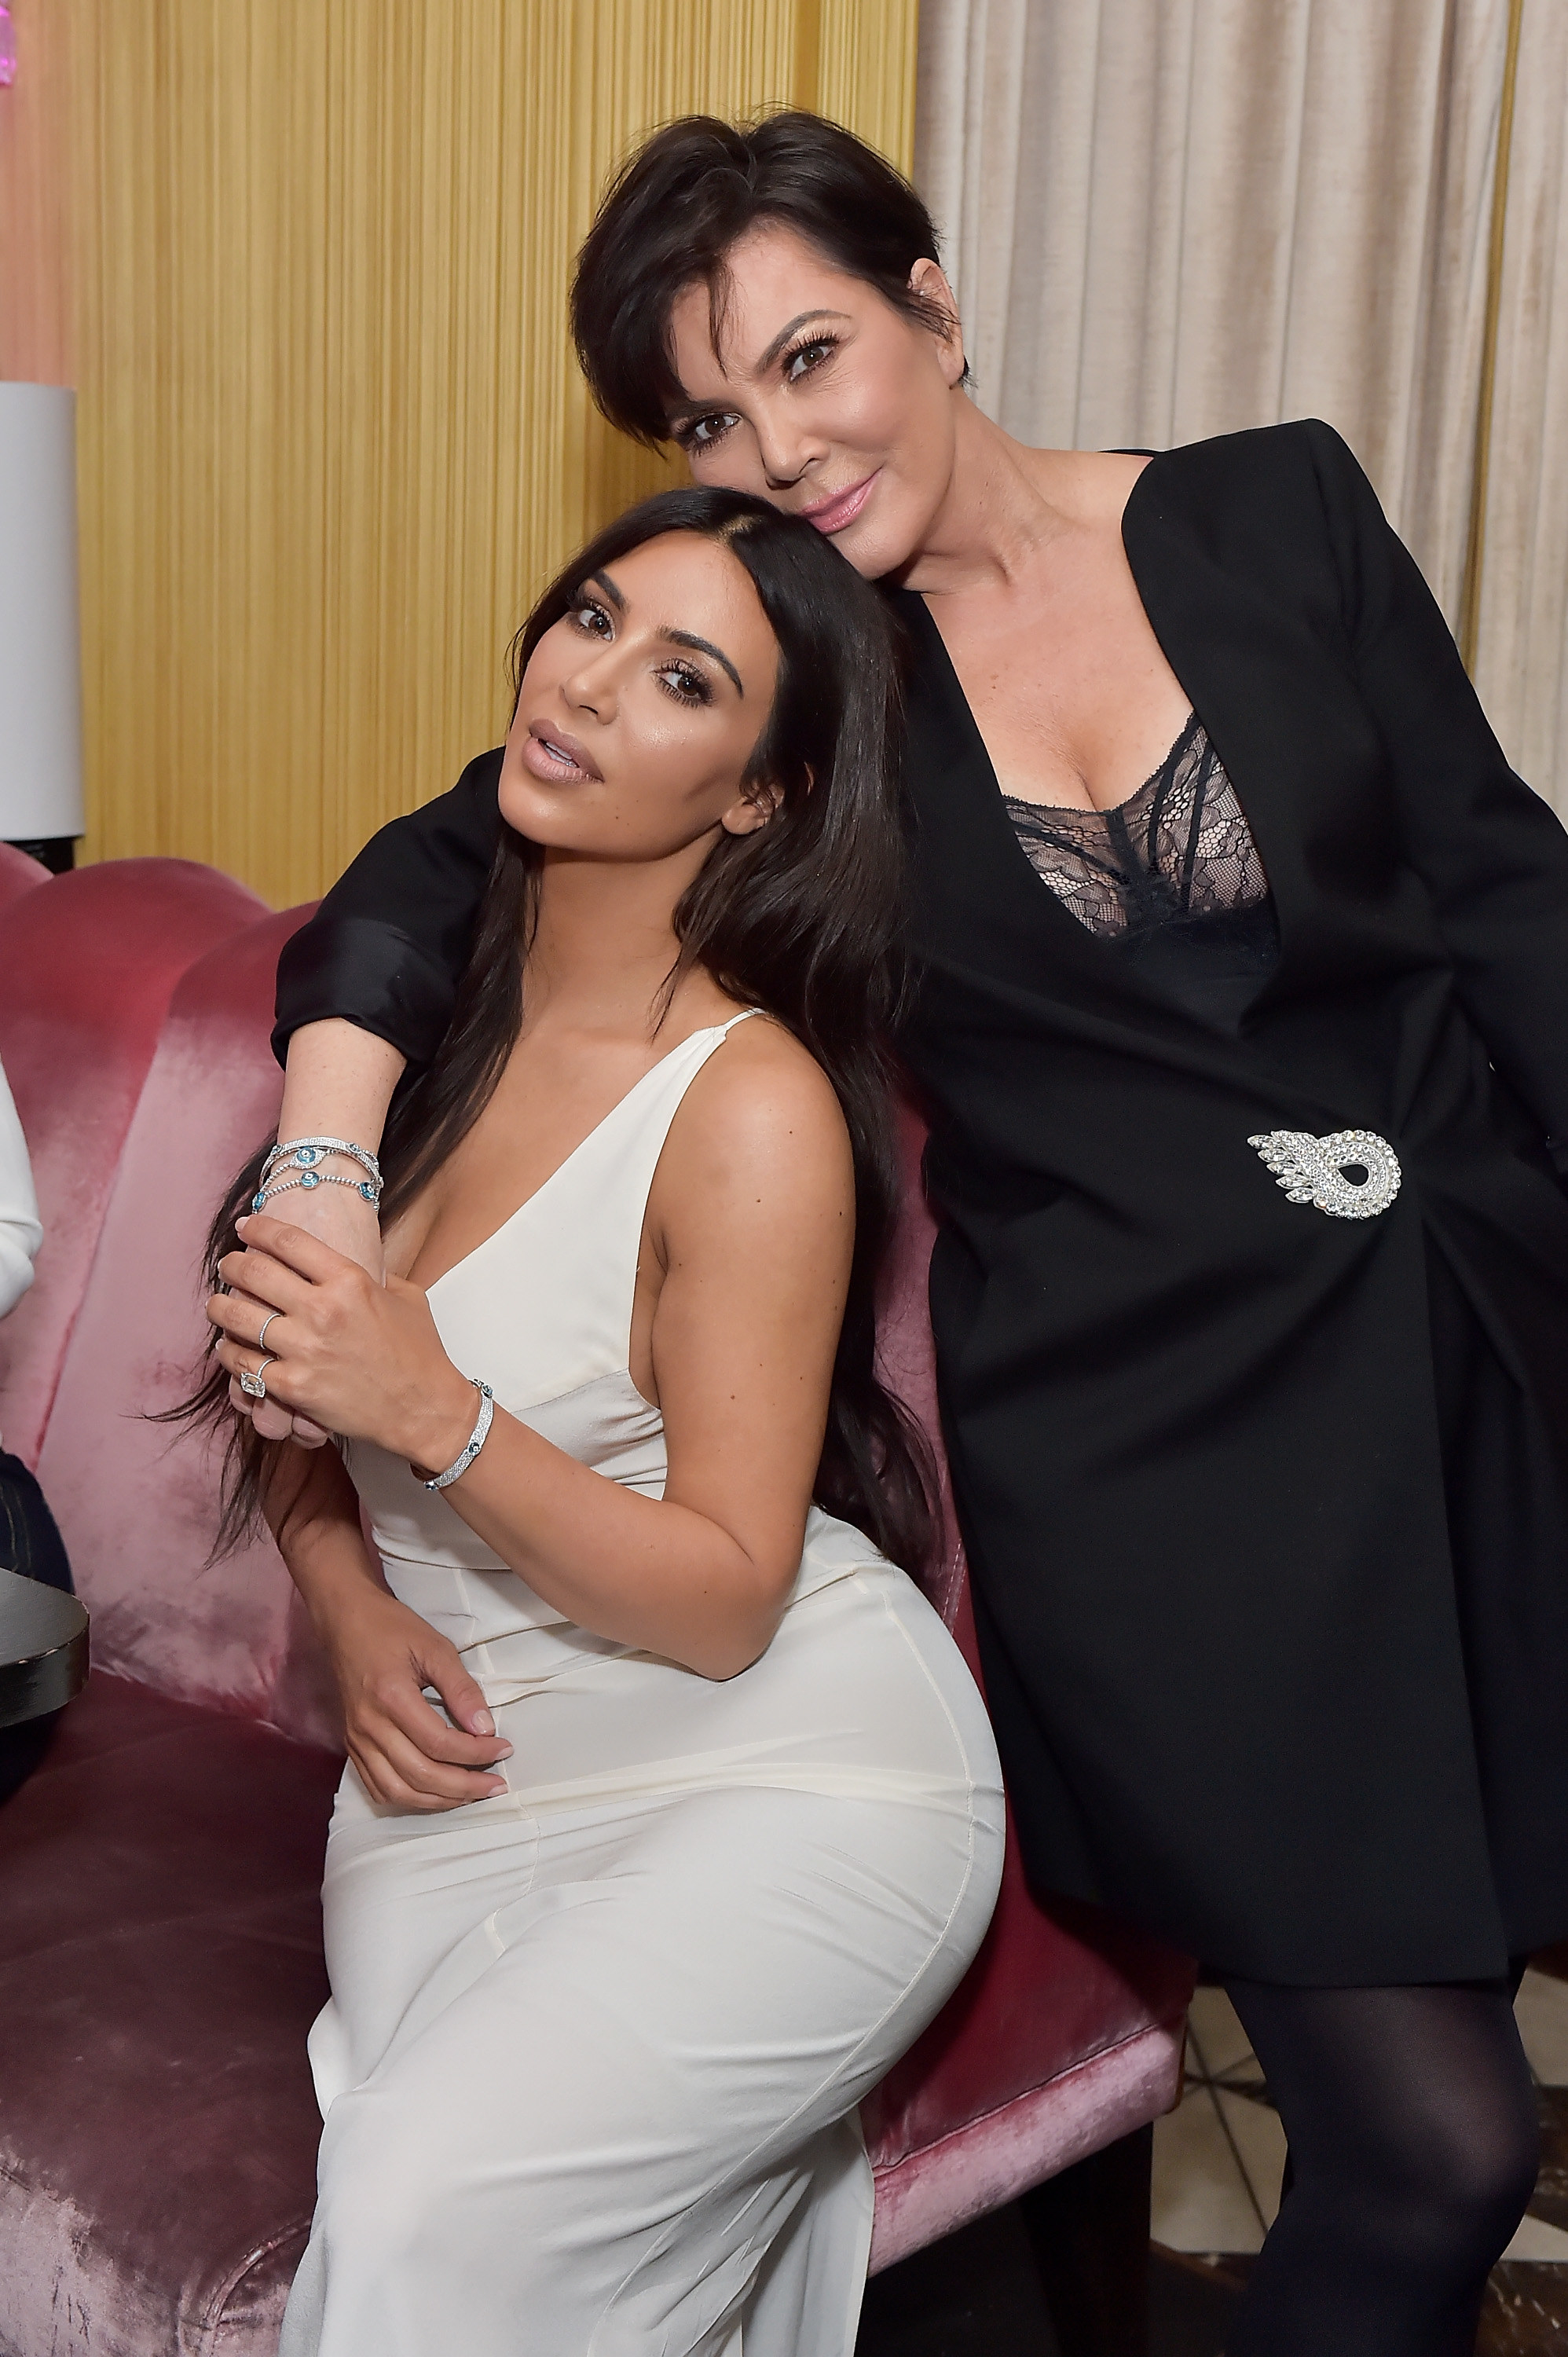 Kris with her arm around a seated Kim